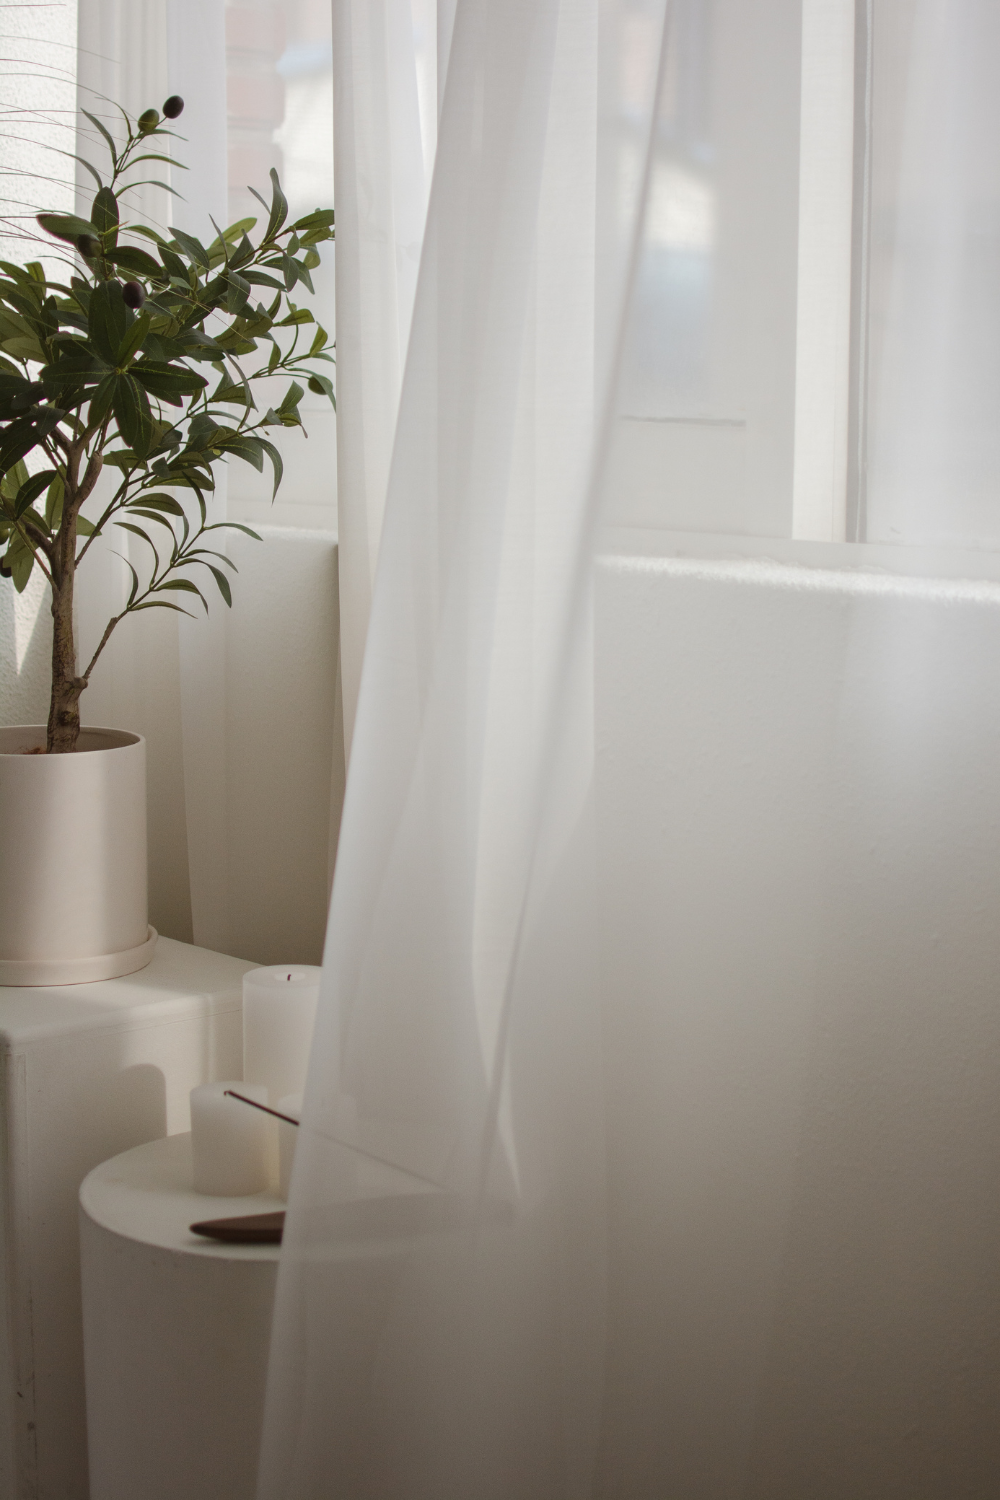 A serene indoor scene featuring a potted plant and sheer white curtains.